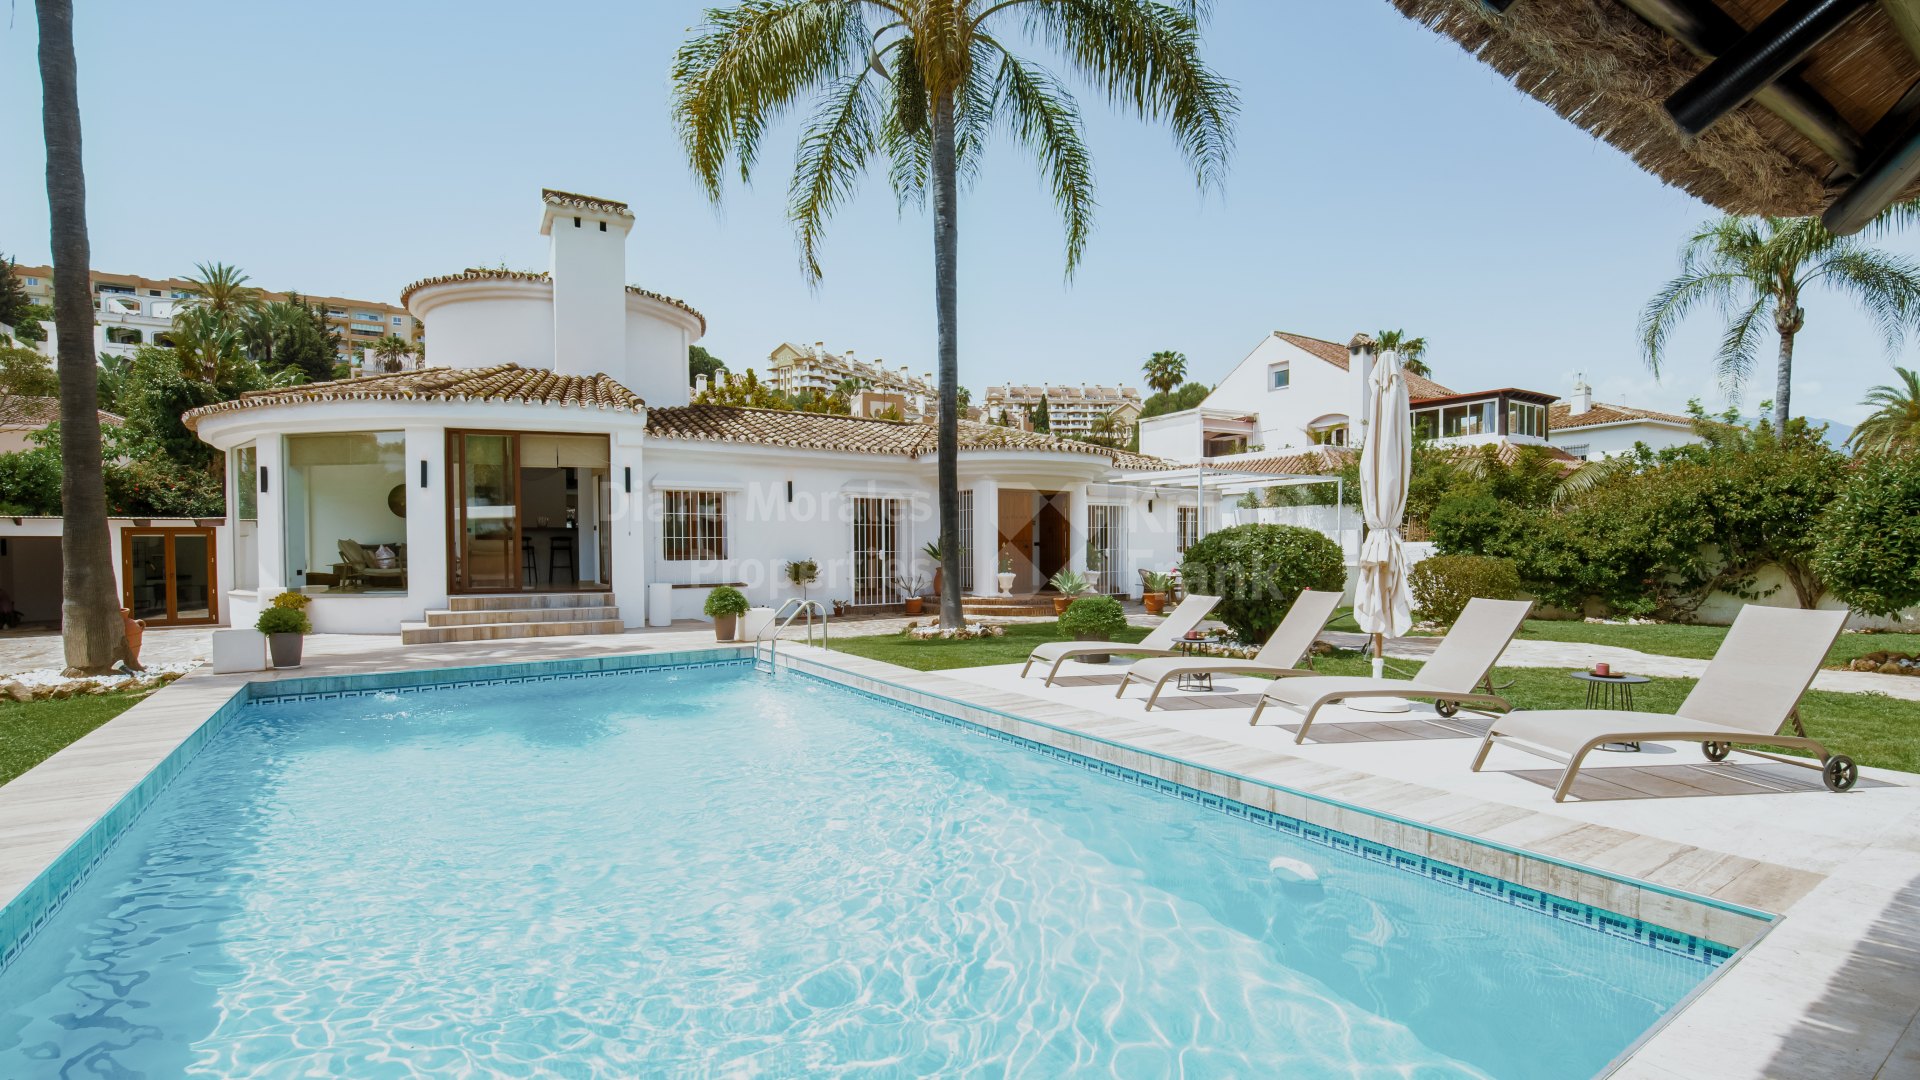 Nueva Andalucia, Villa within walking distance to all kinds of services